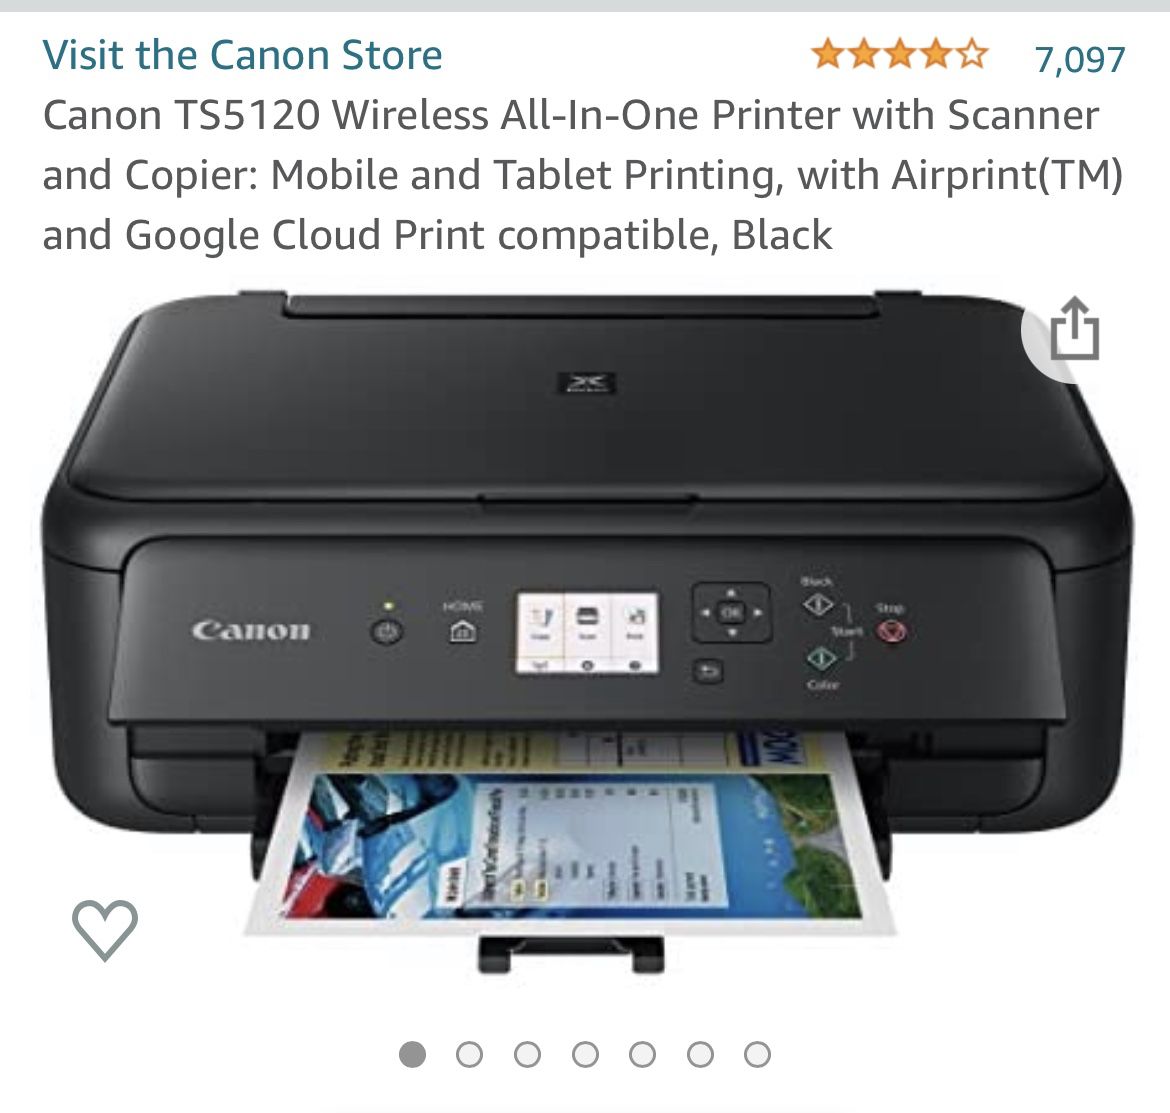 New Cannon Printer / Scanner 